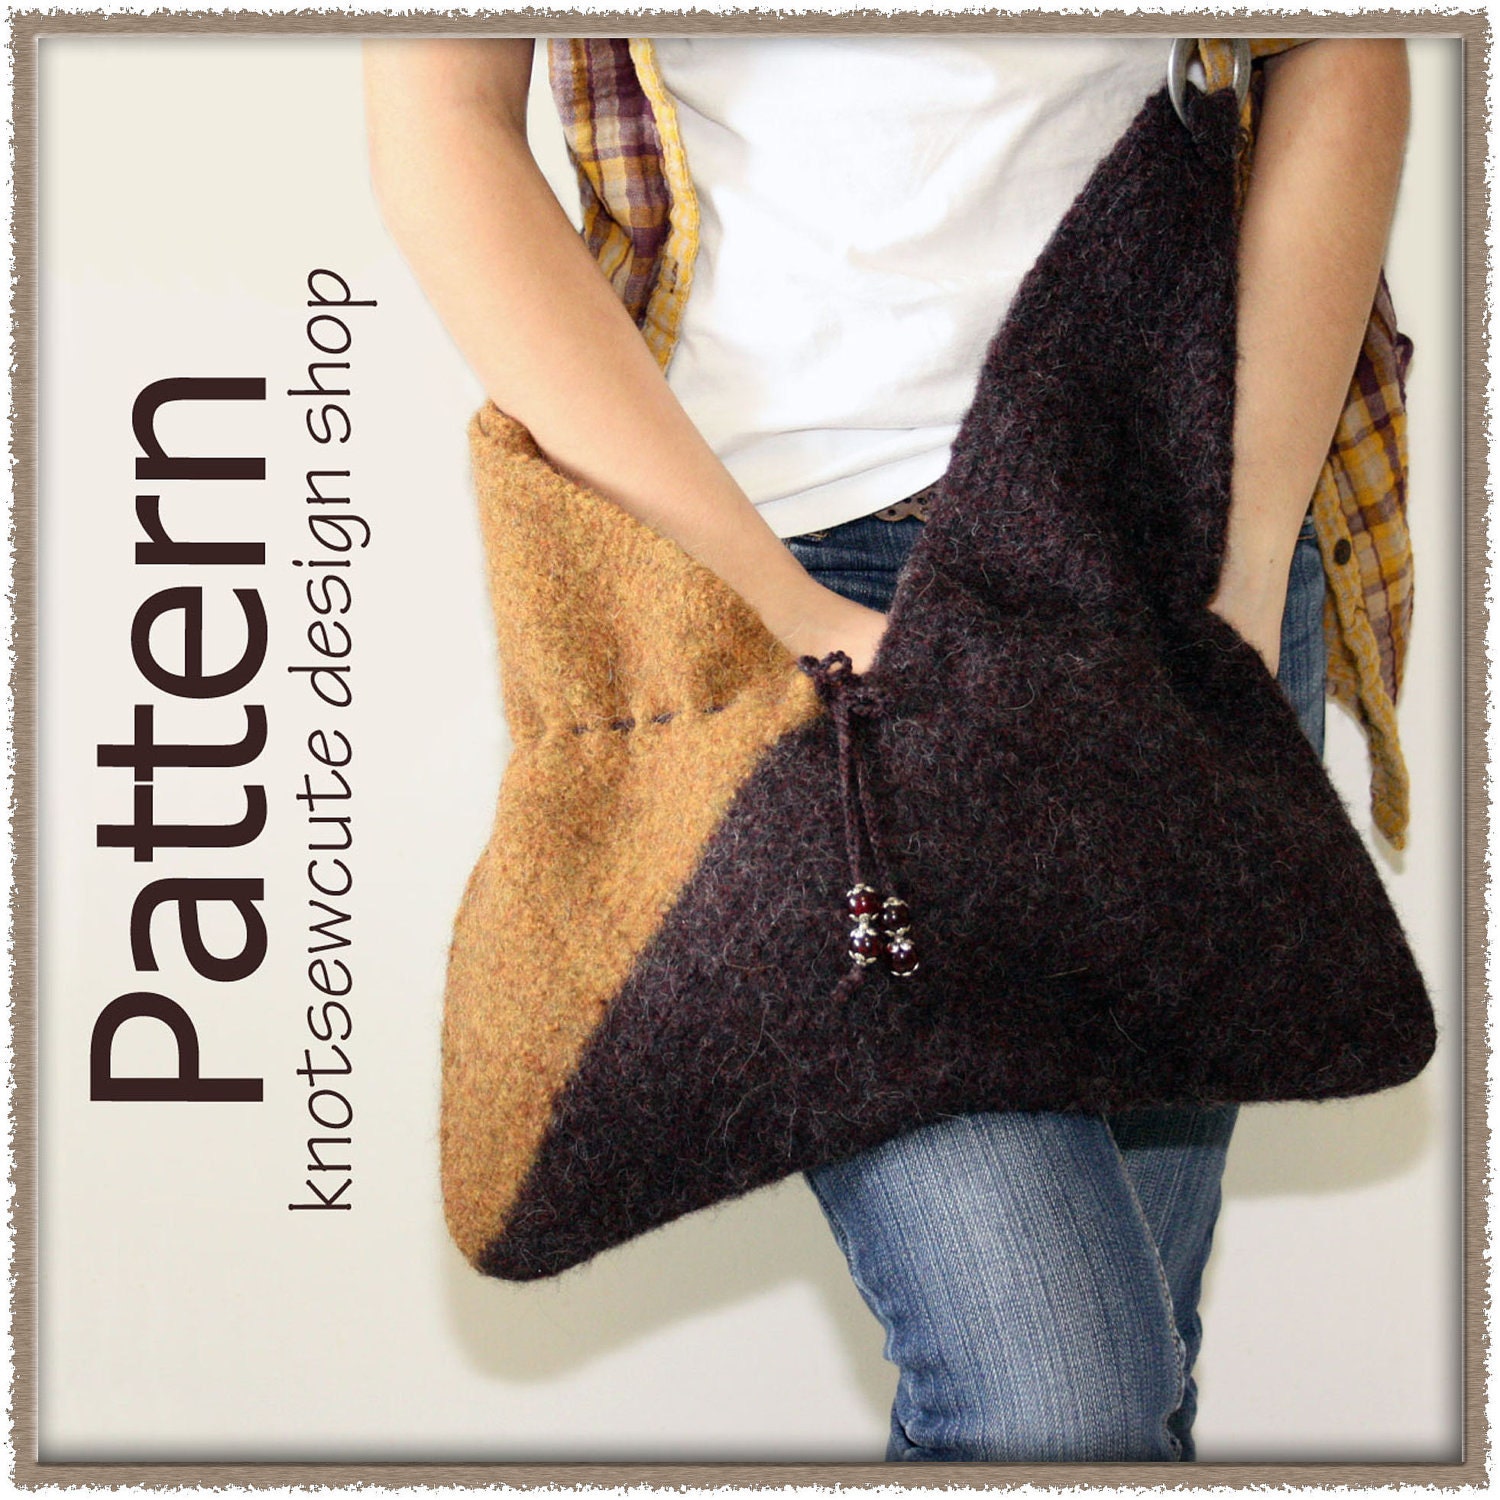 Purse Patterns - Crochet, Quilts, Leather, Embroidery - Free Patterns